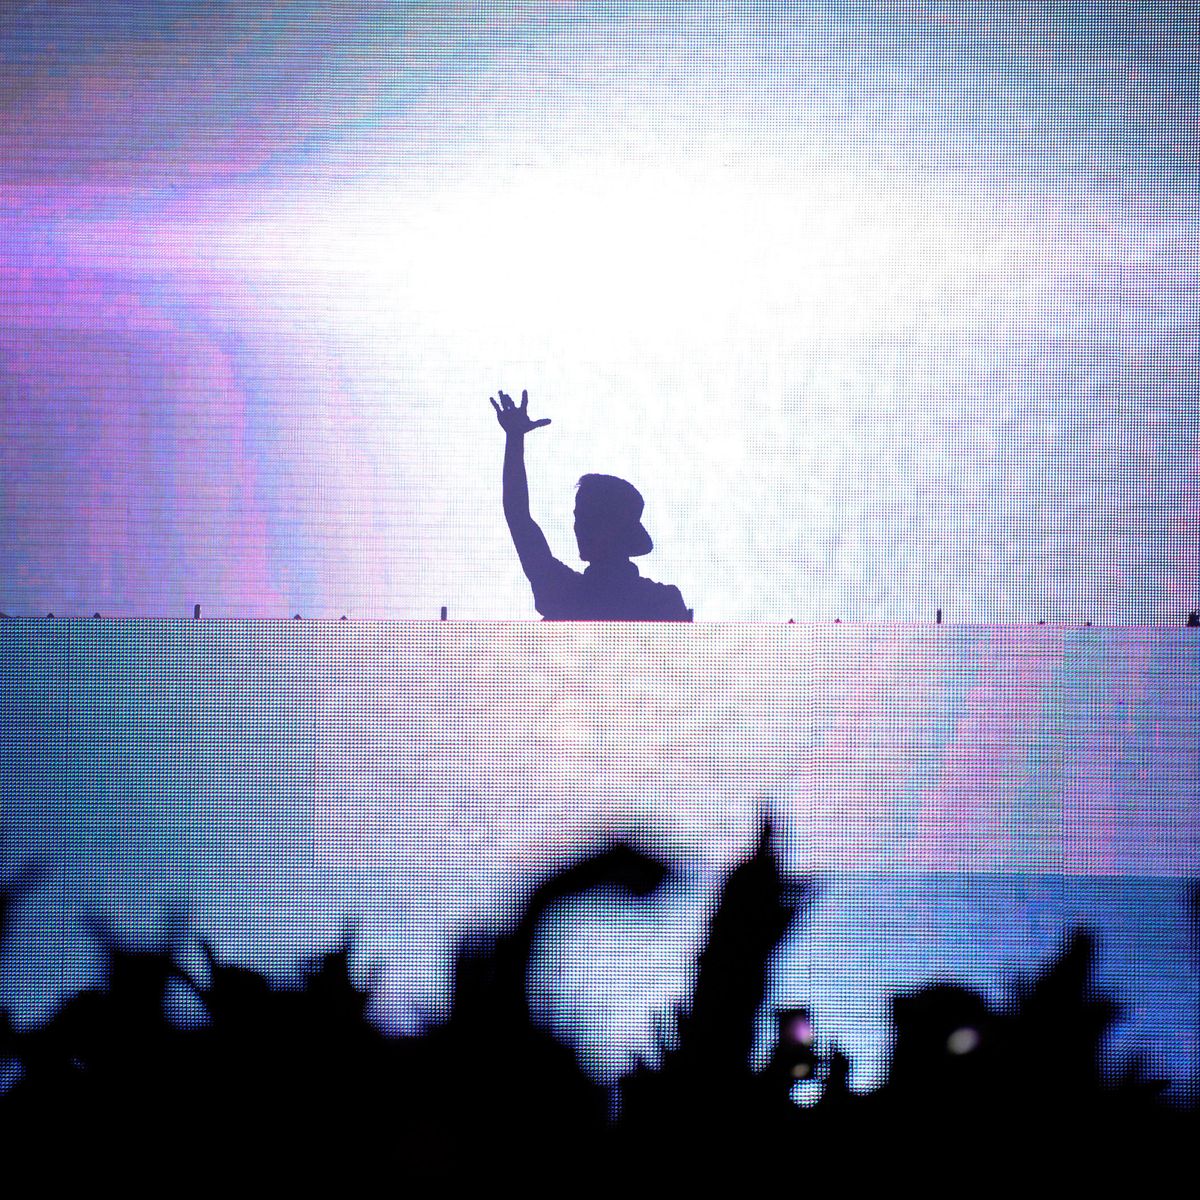 Avicii And Edm S Promise Of Post Recessional Excess